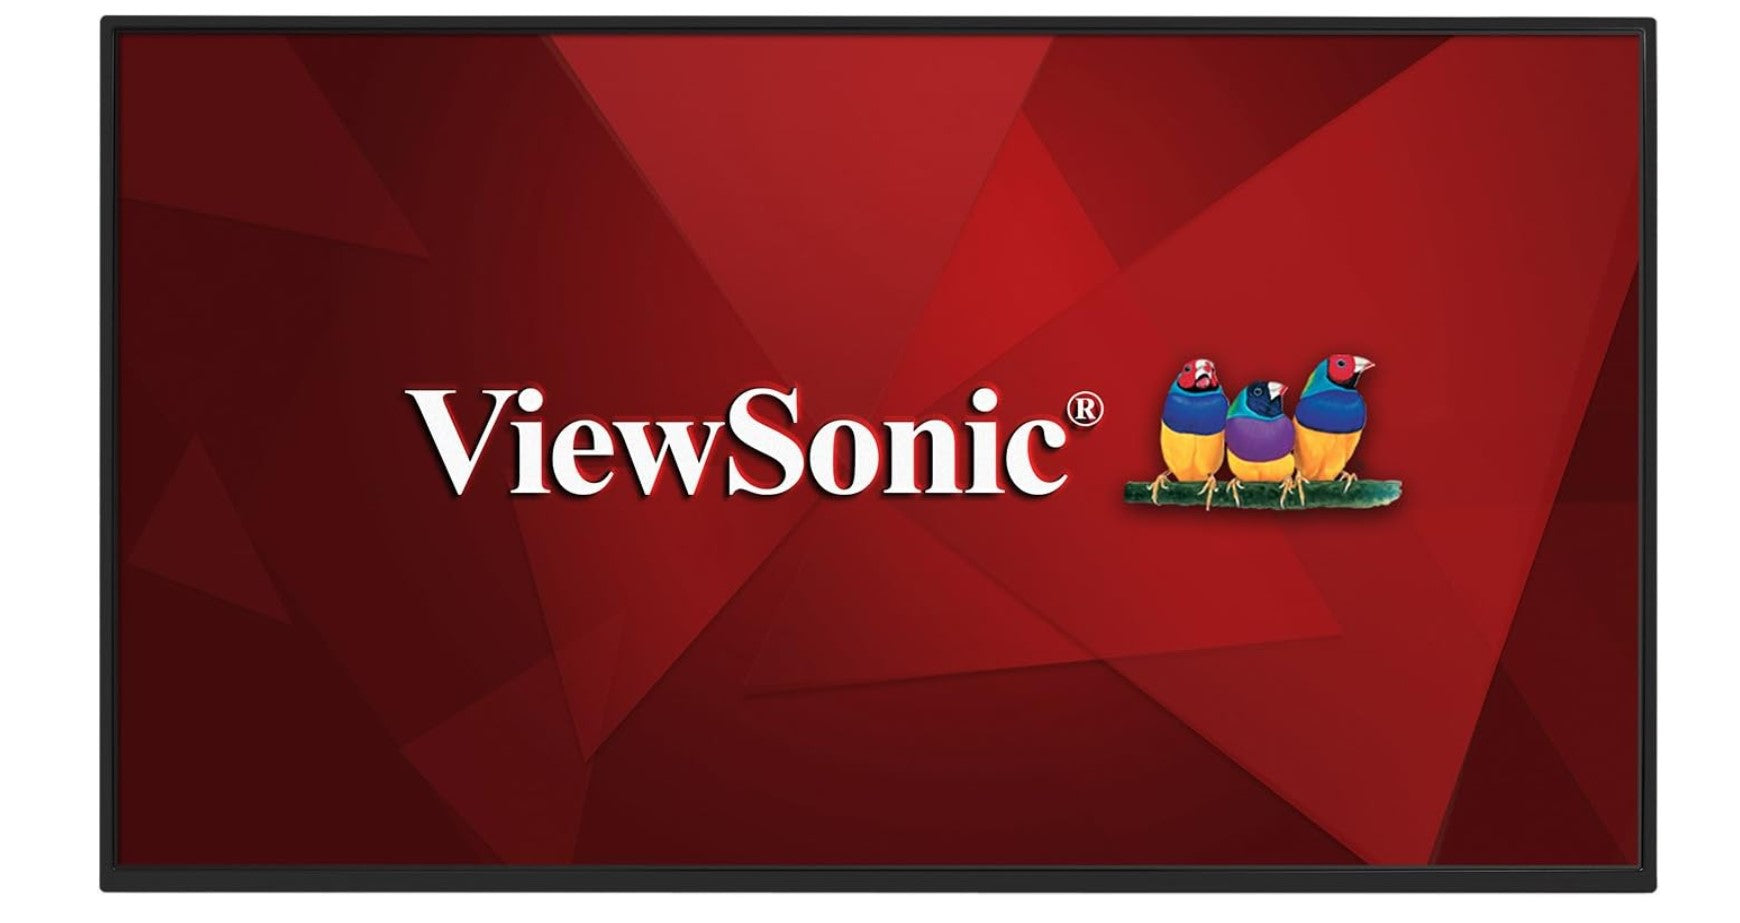 ViewSonic CDM5500R-R 55" LED Media Player Commercial Display - Certified Refurbished